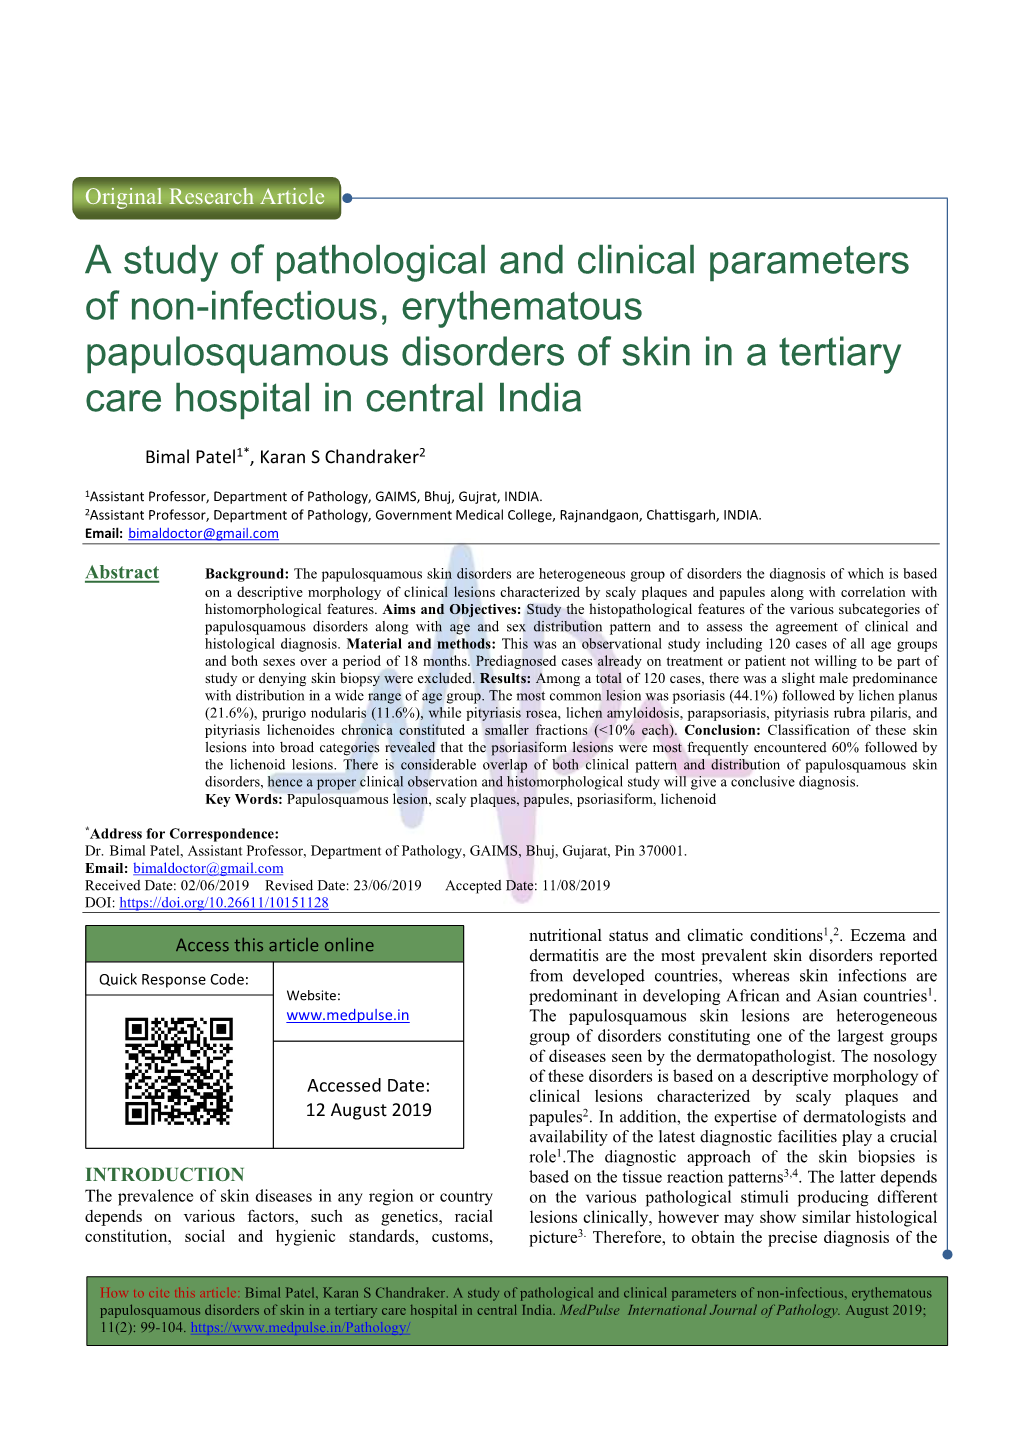 A Study of Pathological and Clinical Parameters of Non-Infectious, Erythematous Papulosquamous Disorders of Skin in a Tertiary Care Hospital in Central India